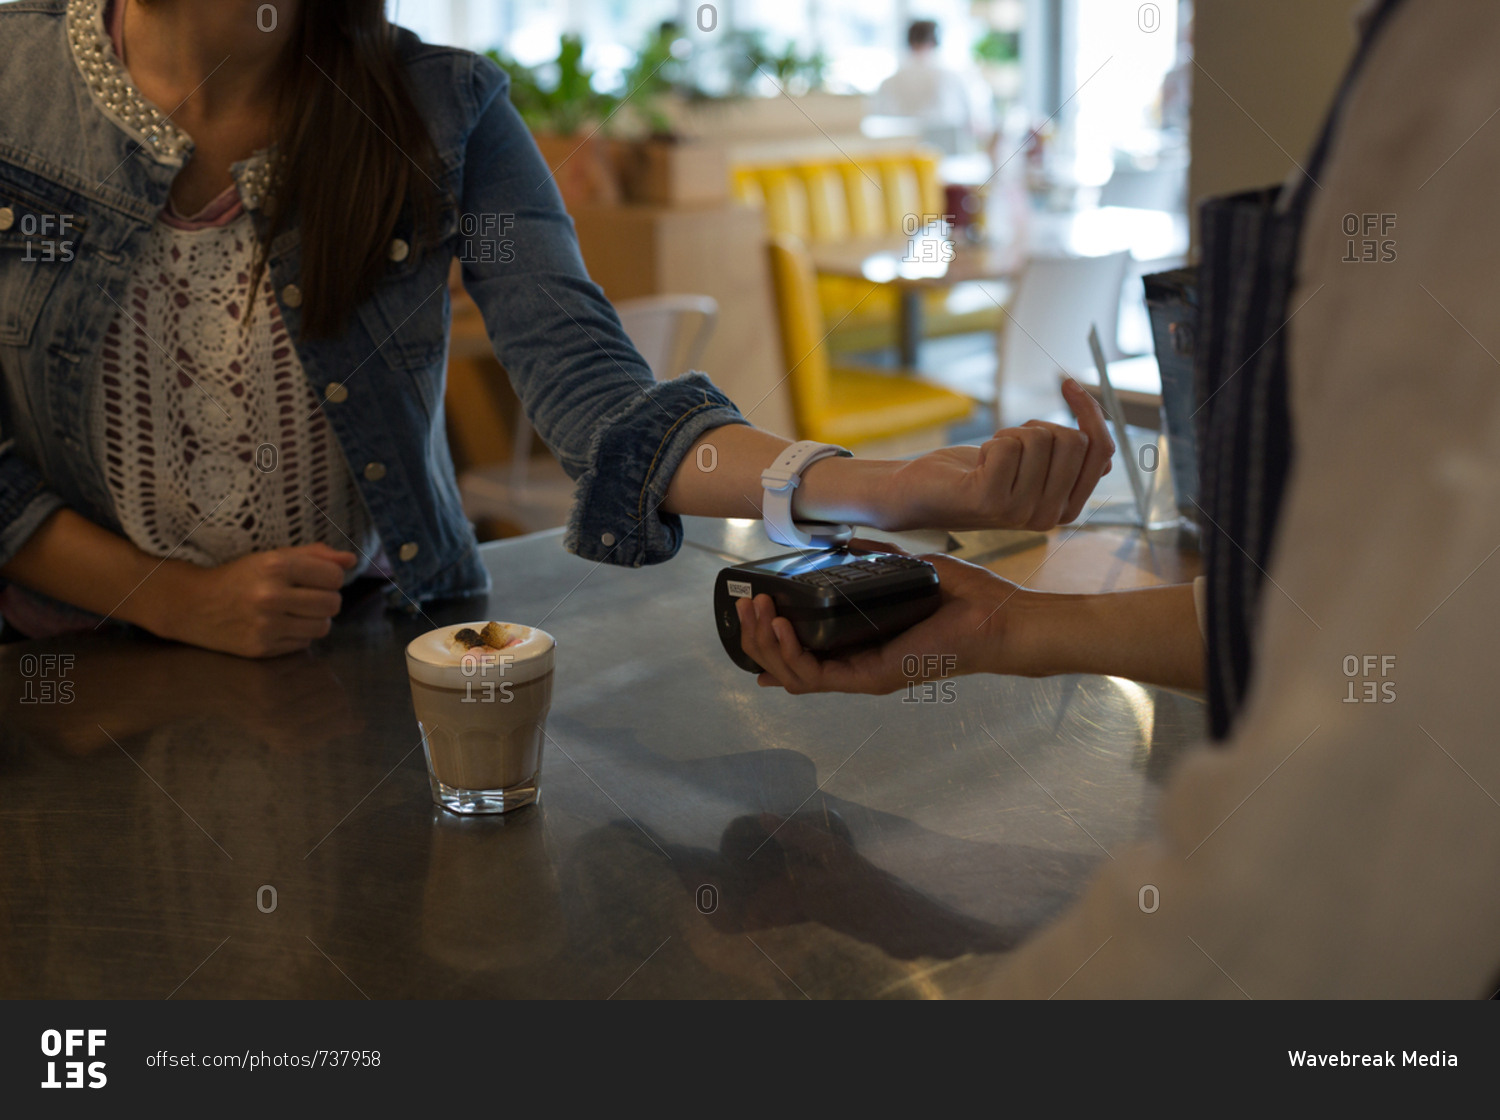 Mid section of woman paying with NFC technology on smartwatch in cafe